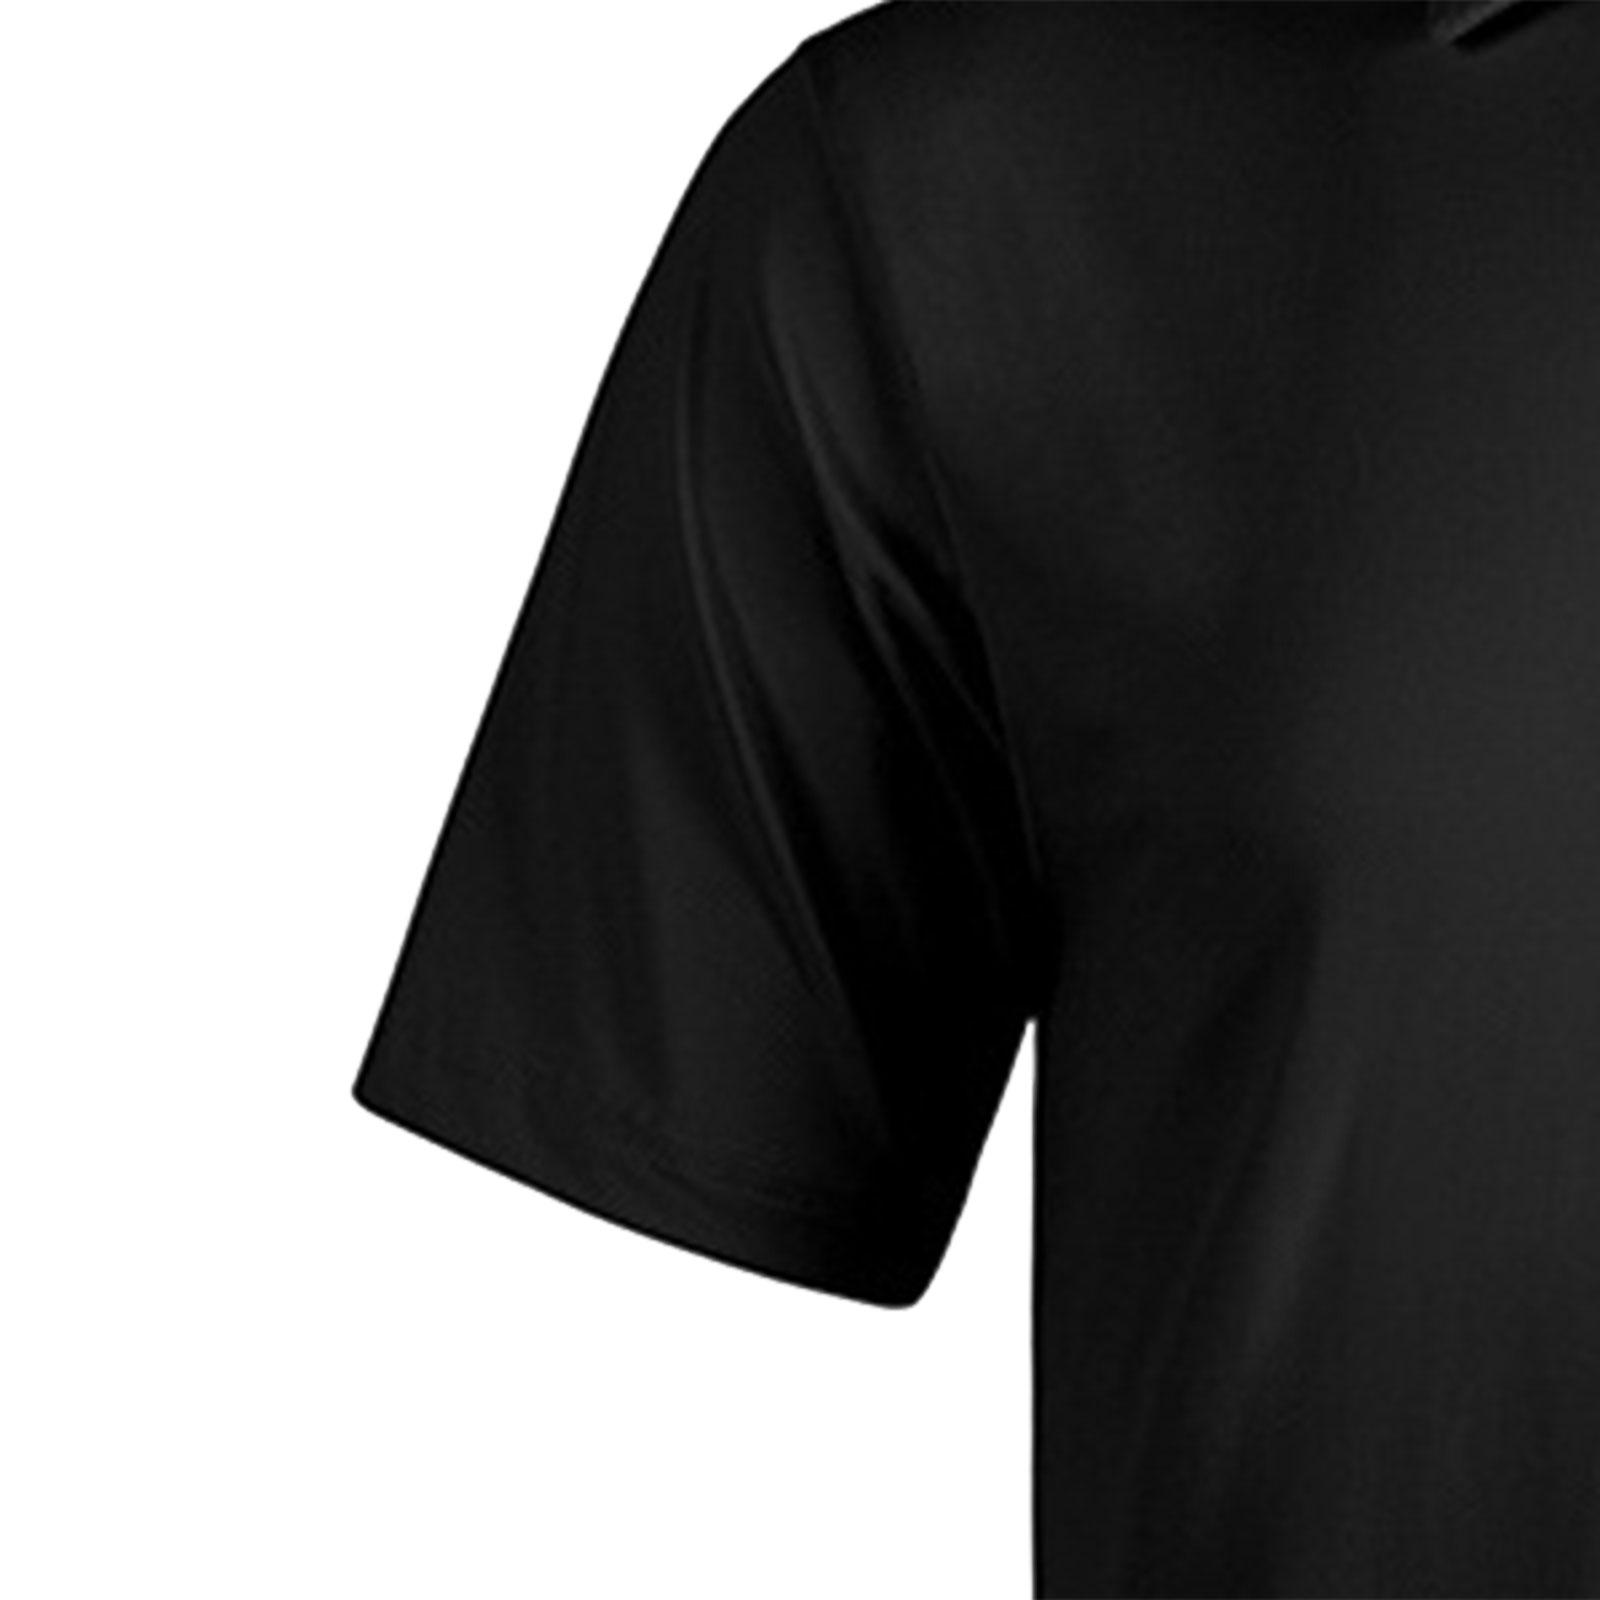 Mens Short Sleeve T Shirt Casual Tee Shirt for Business Hiking Daily Leisure XL Black